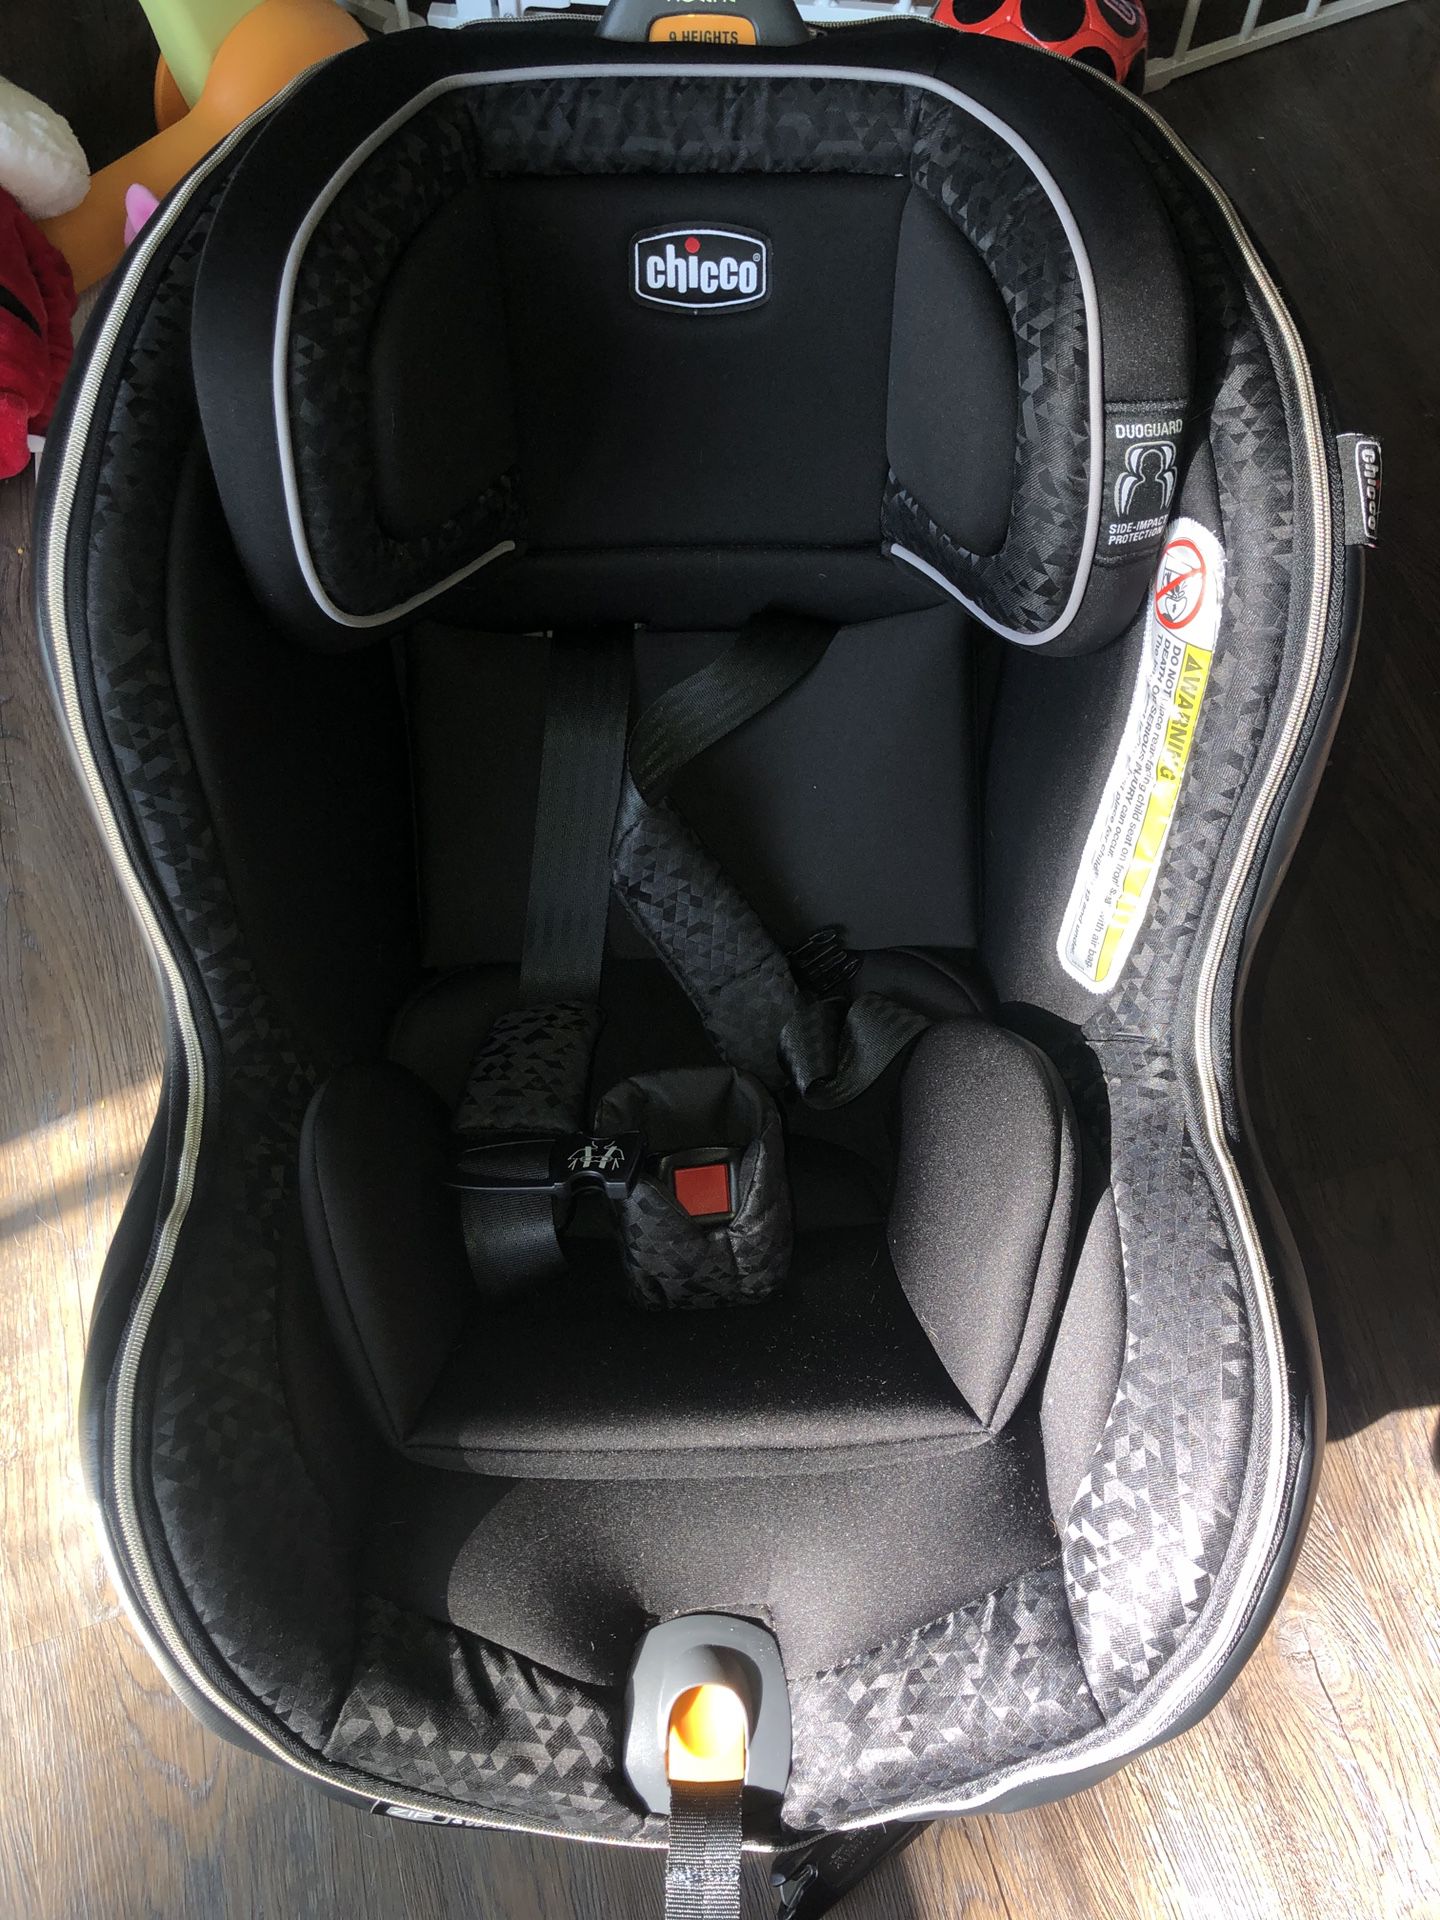 Brand new Chicco car seat